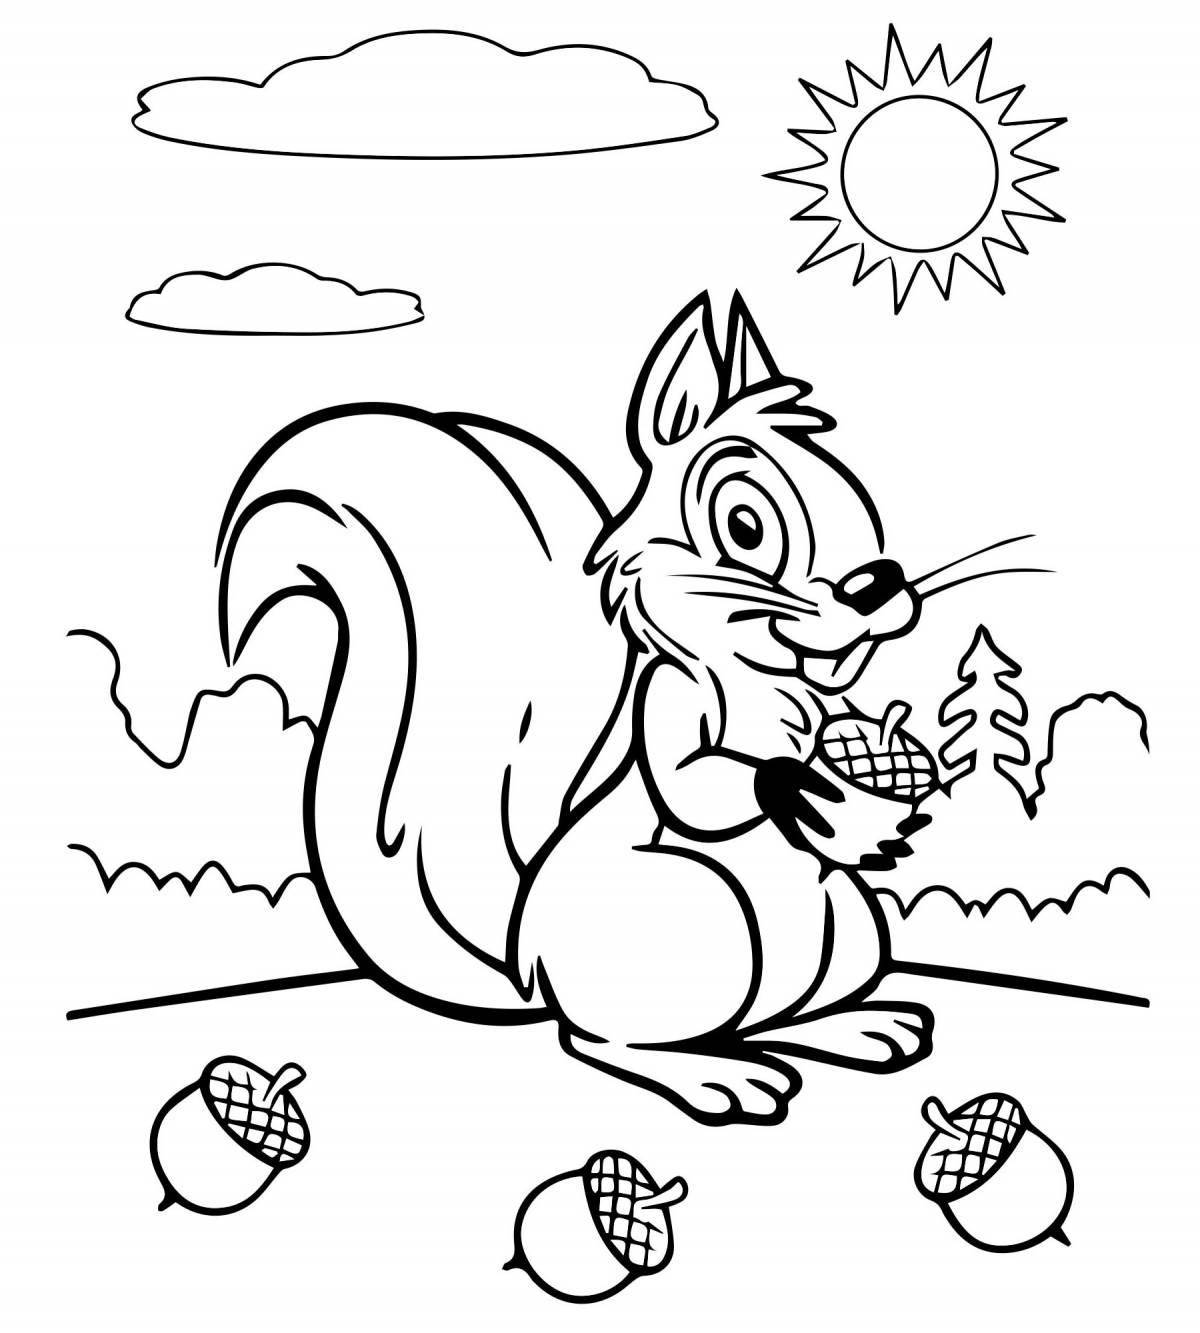 Squirrel alluring drawing